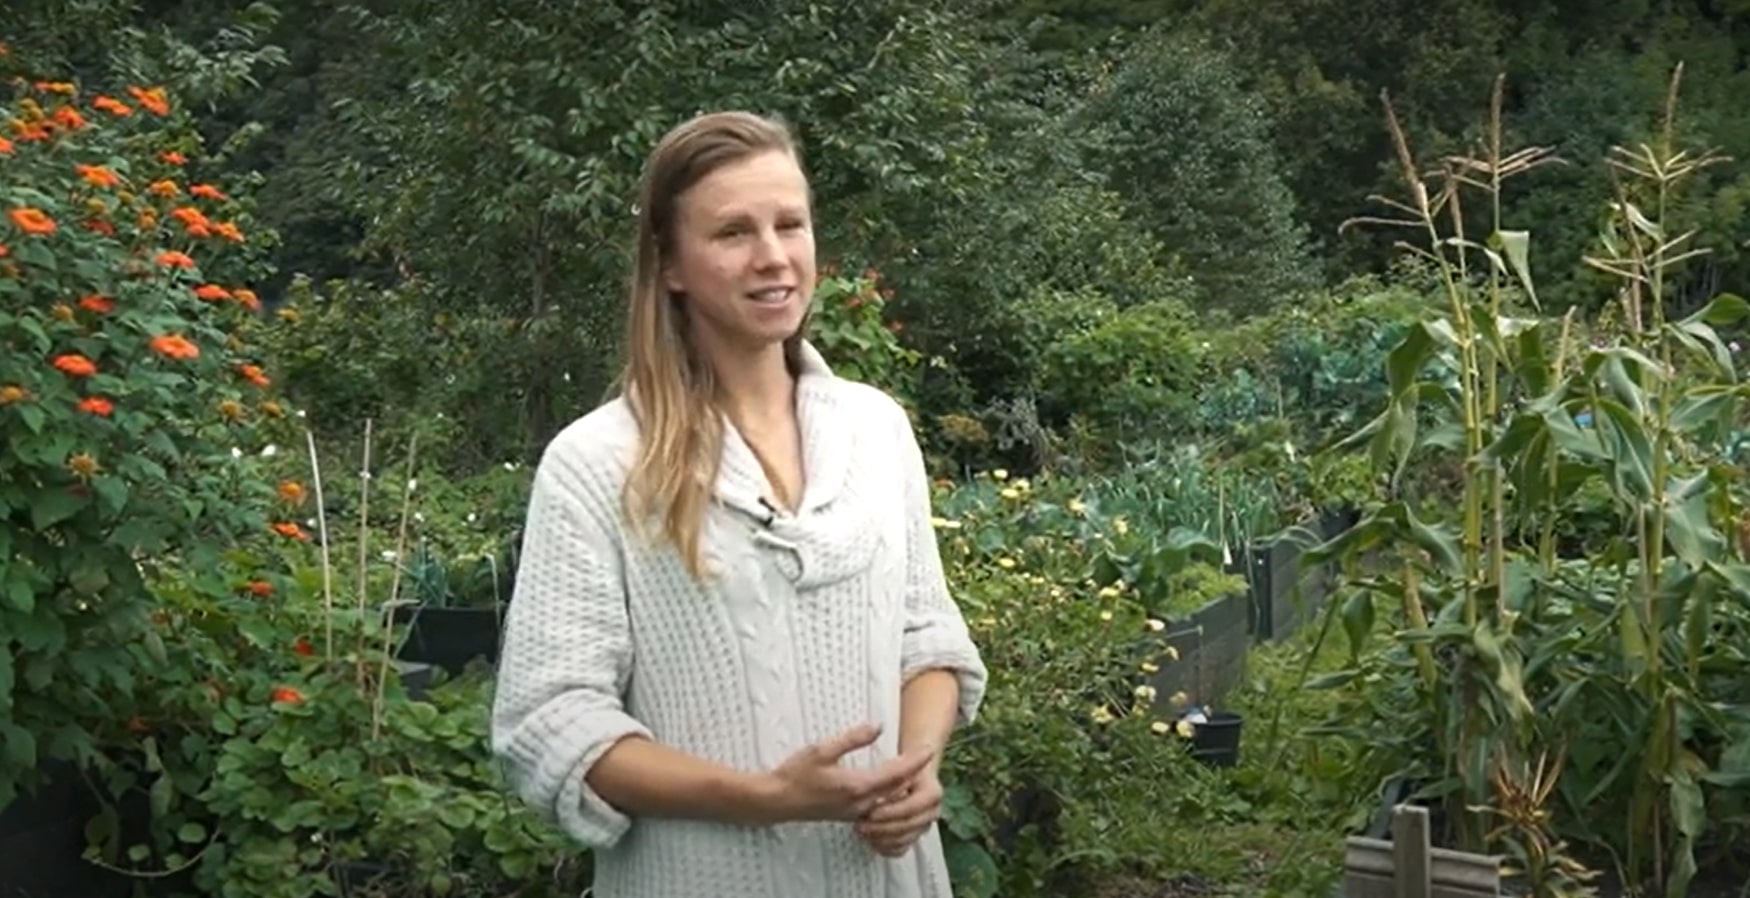 Martyna at Redacre growing project